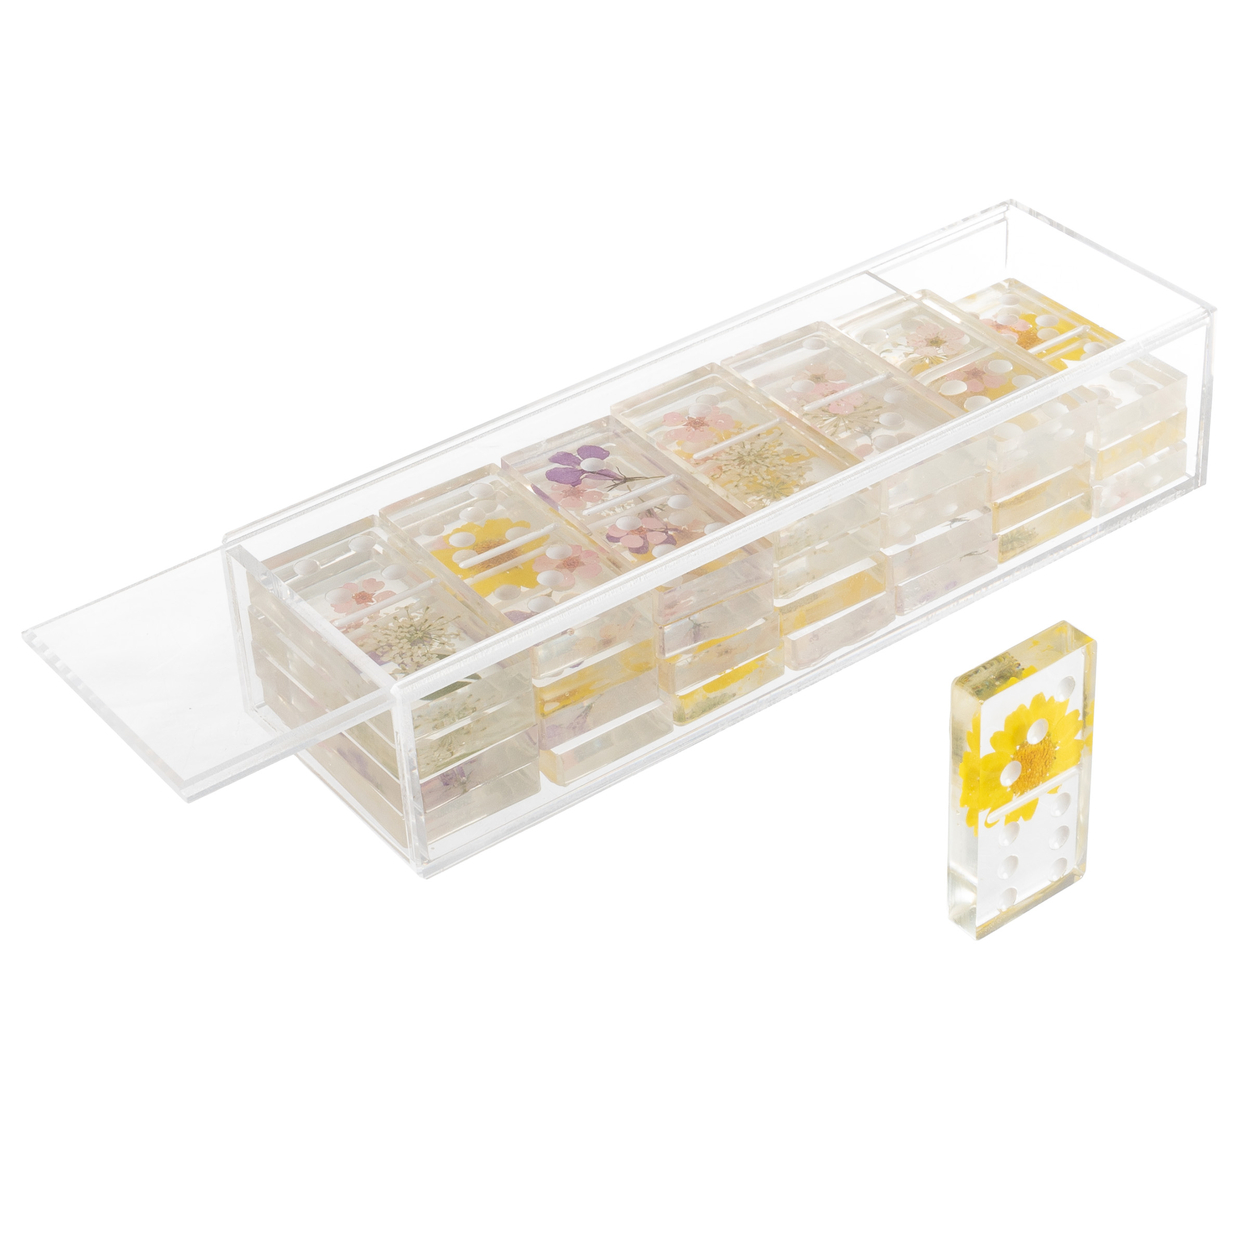 Acrylic Dominos Set - 28-Piece Floral Domino Game With Display Box